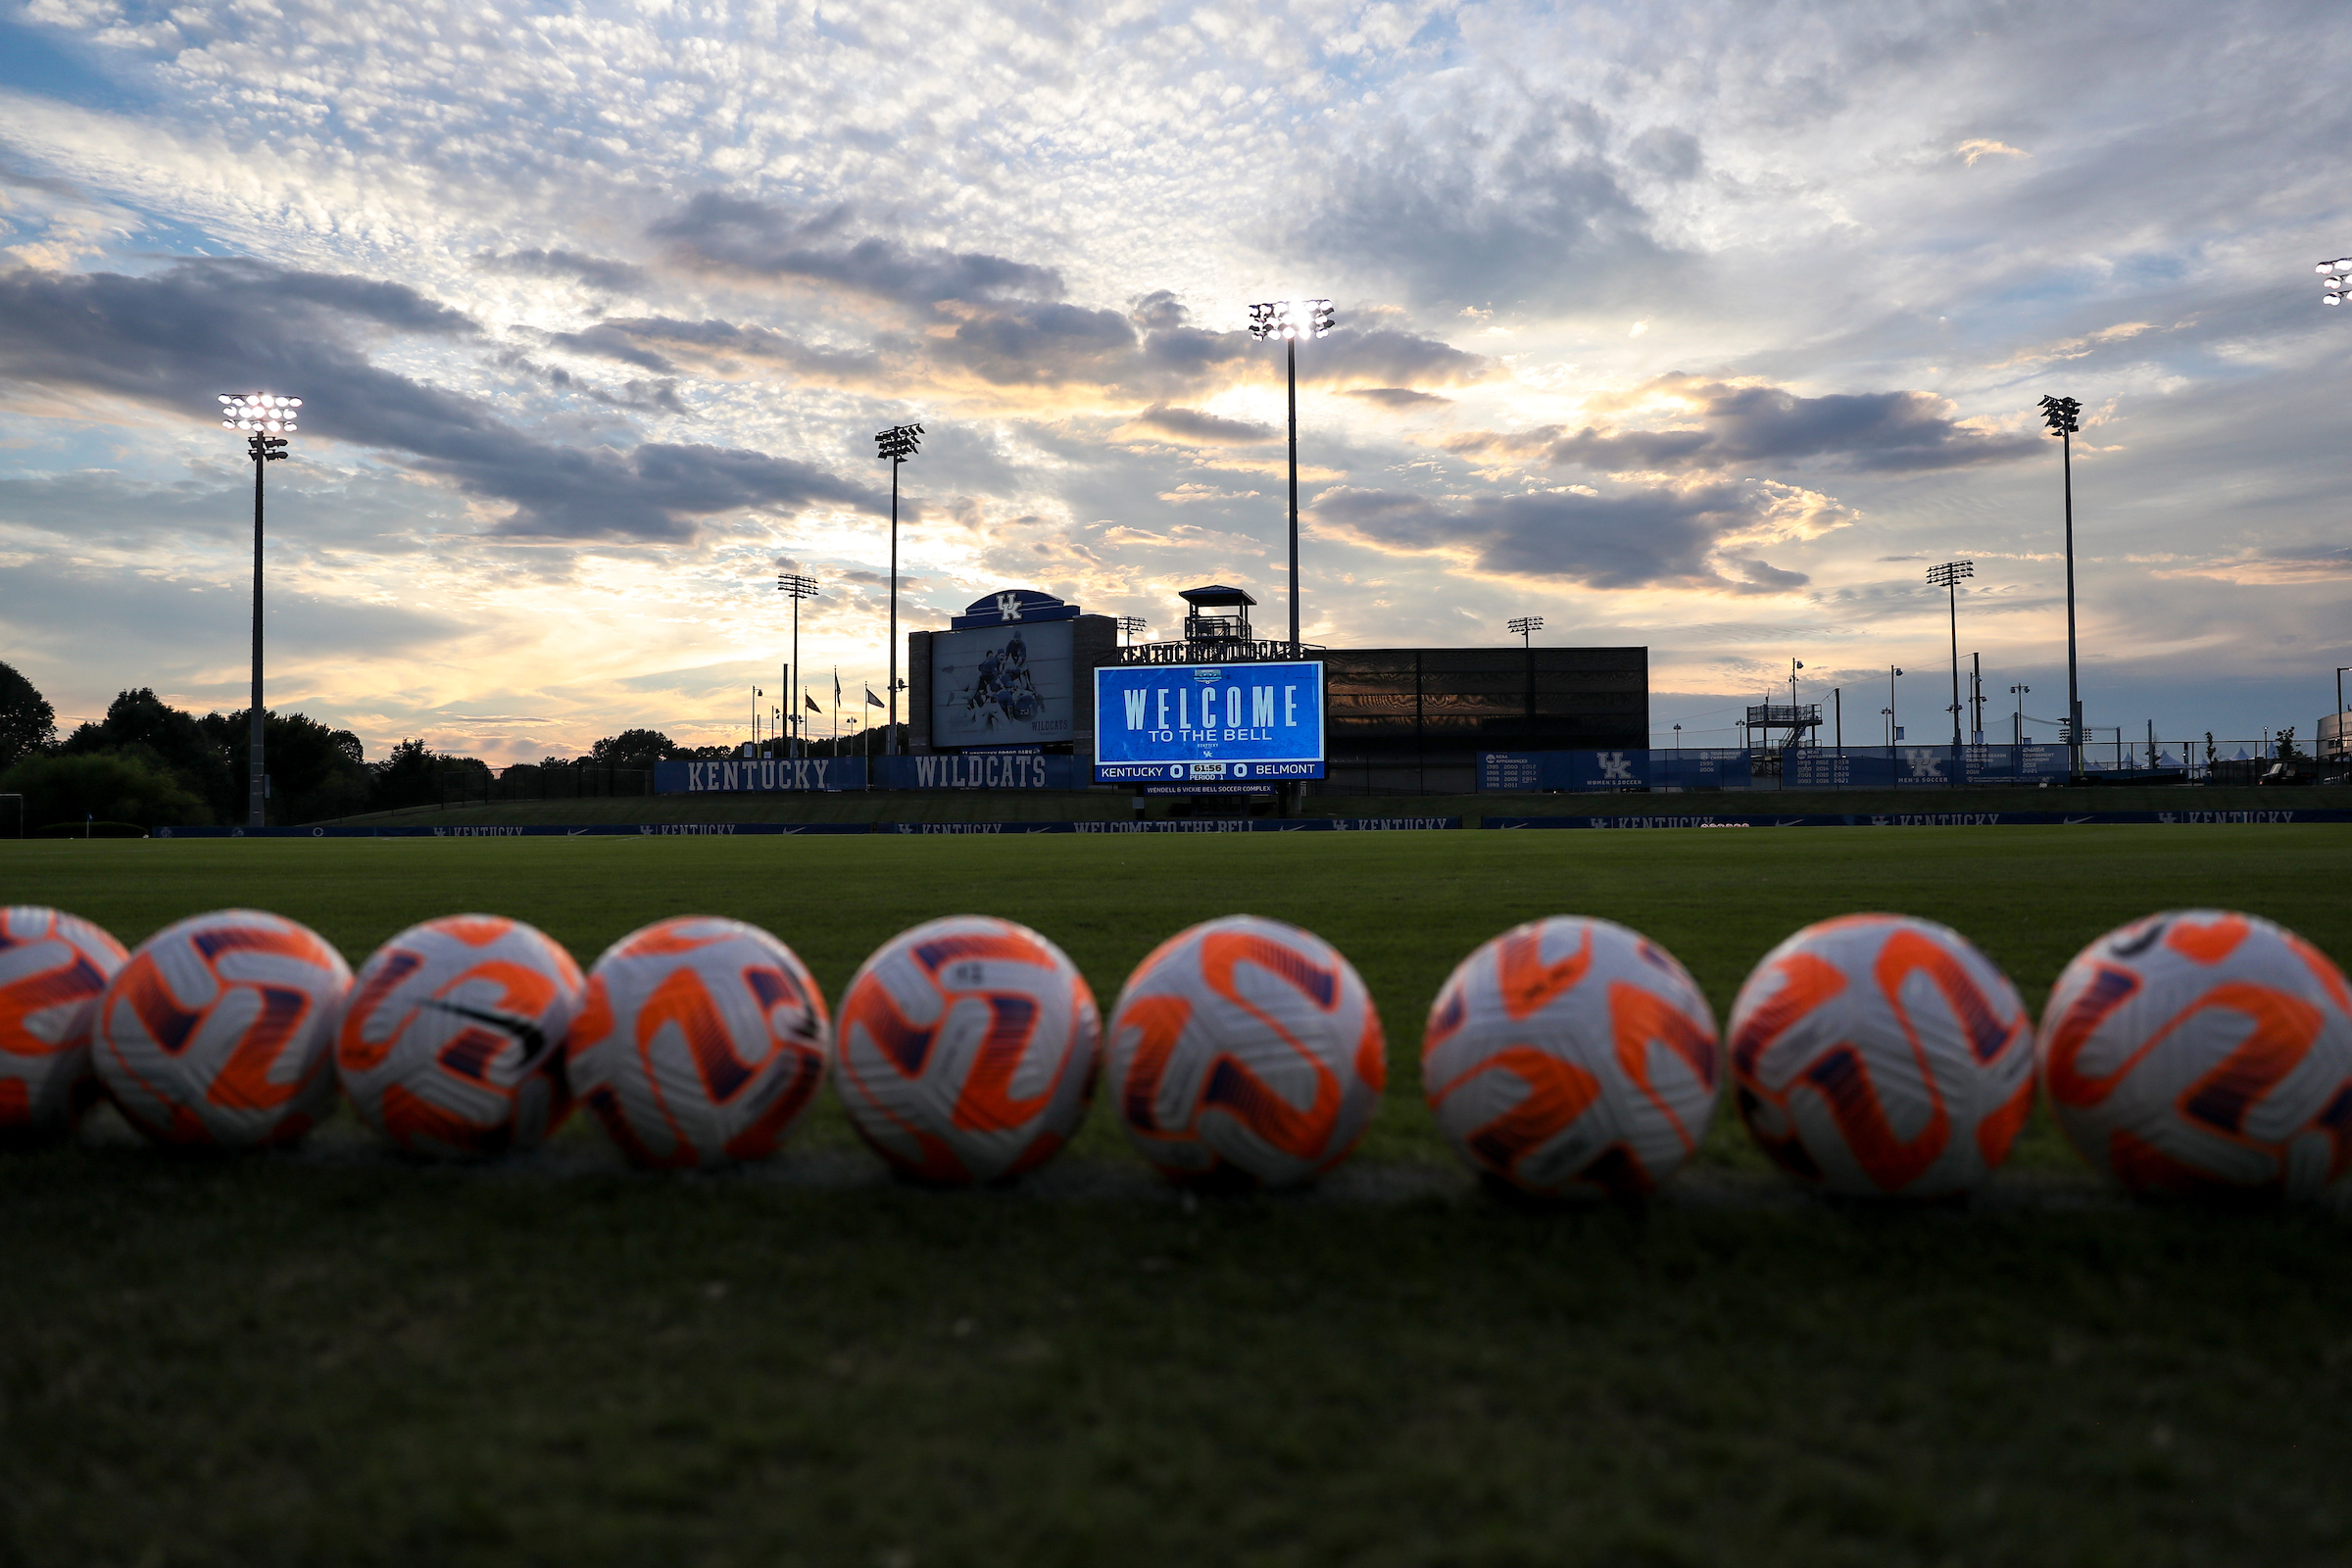 Men’s Soccer Battle of the Bluegrass Takes Place in Lexington on Tuesday